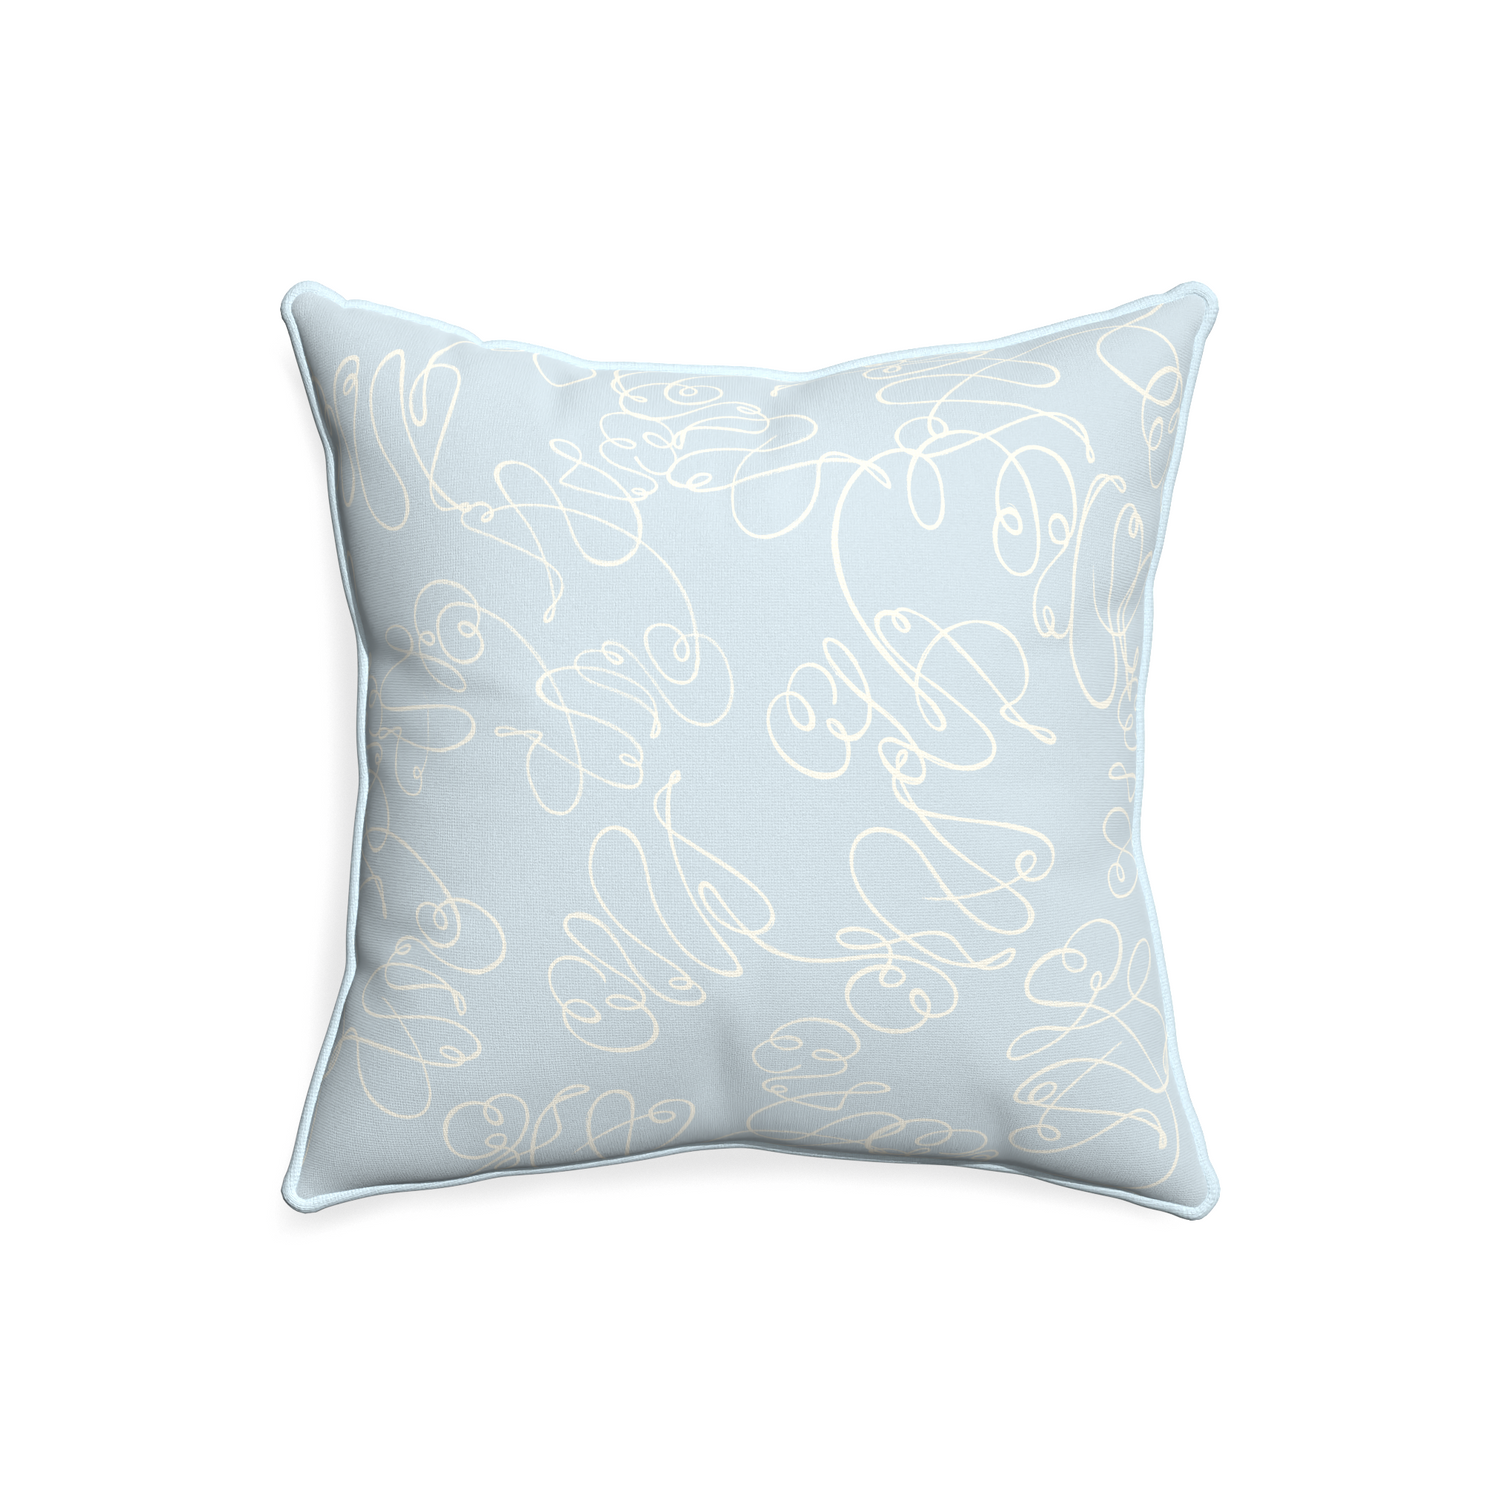 20-square mirabella custom pillow with powder piping on white background